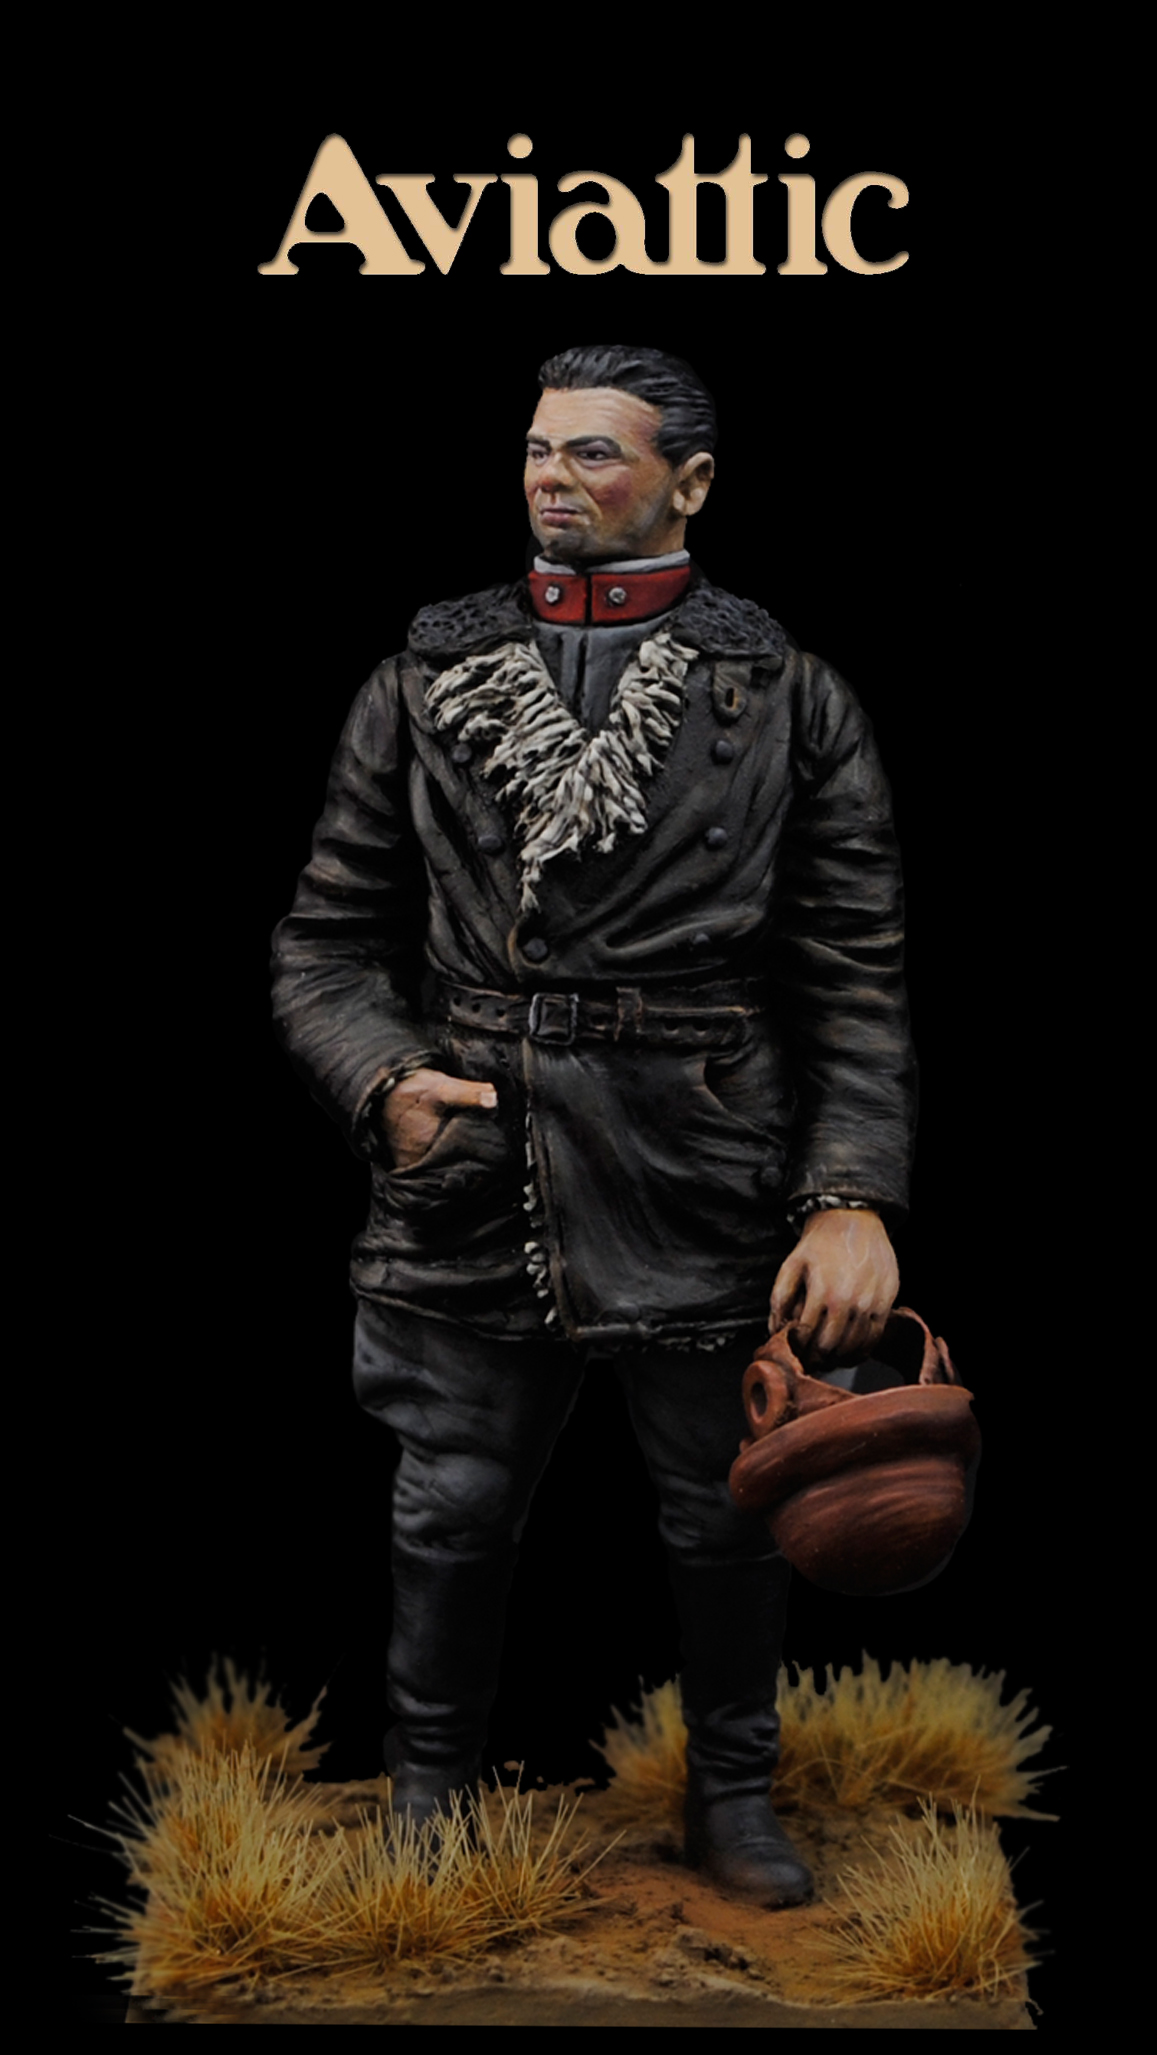 Aviattic Models 1/32 GERMAN WWI STANDING PILOT with HANDS ON HIPS Resin Figure